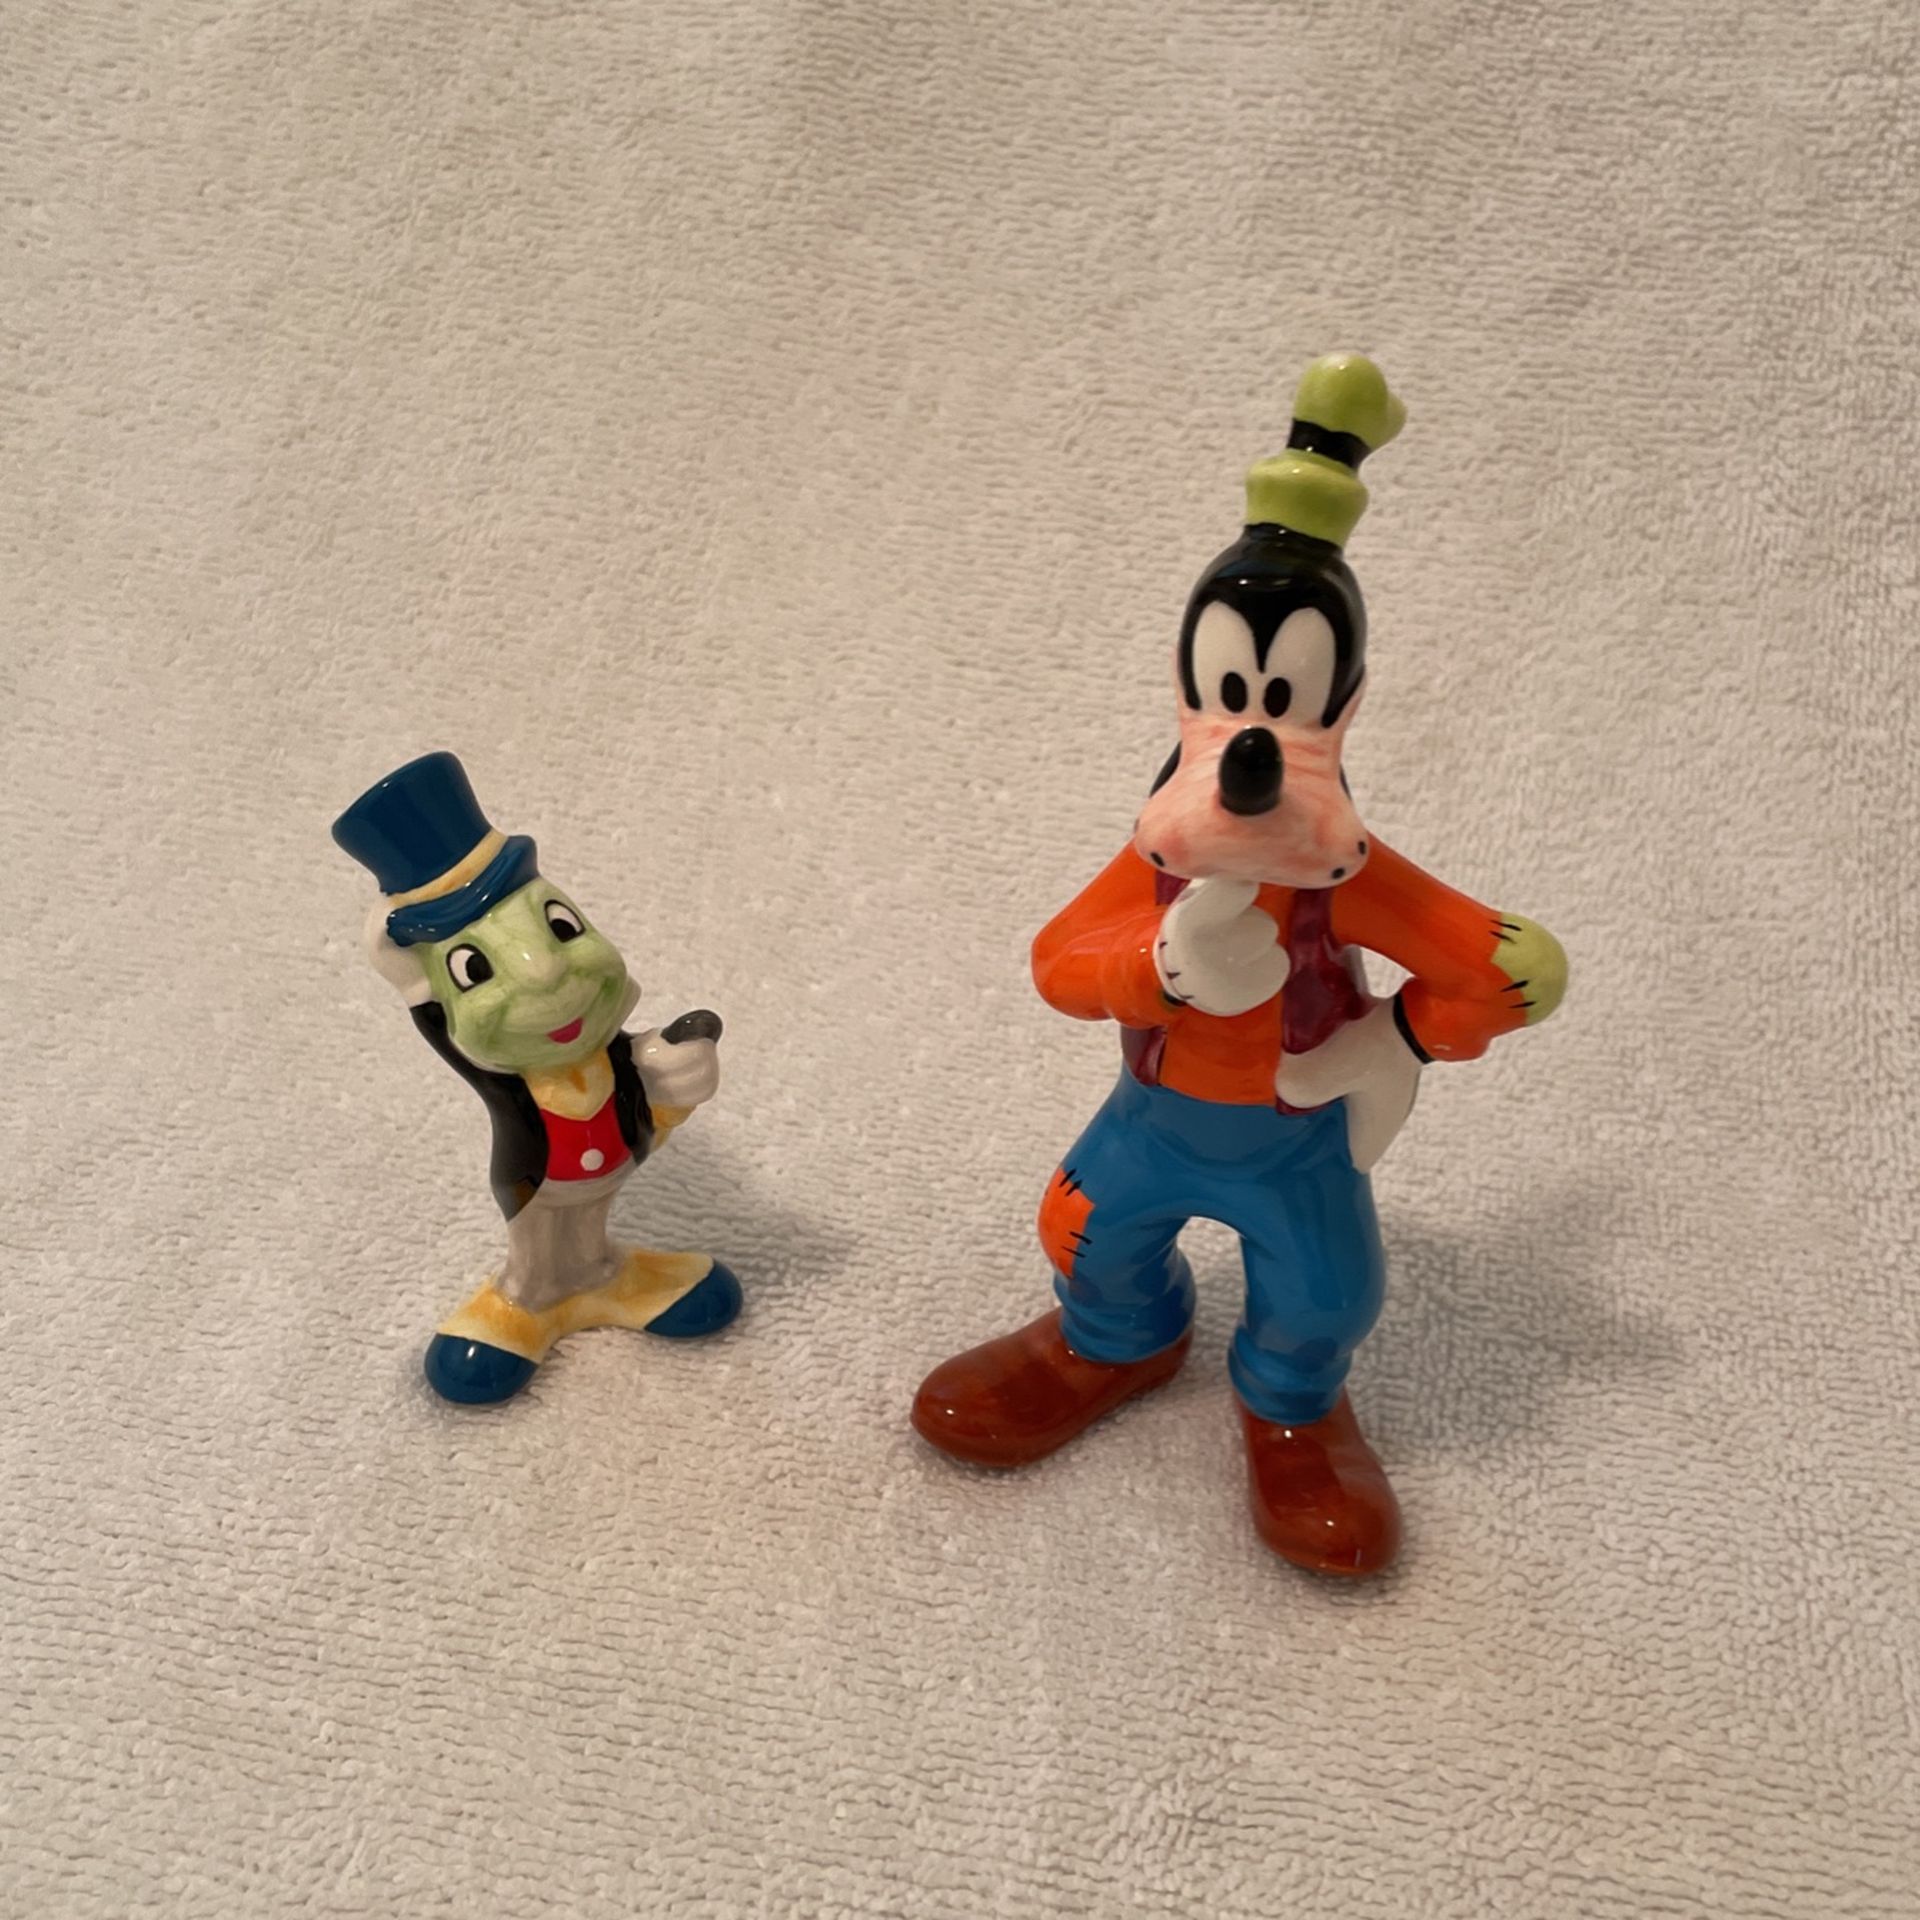 Disney Ceramic Figurines Goofy 5 1/2 Tall  & Jimimey Cricket 2.5” Tall Excellent Condition Like New 